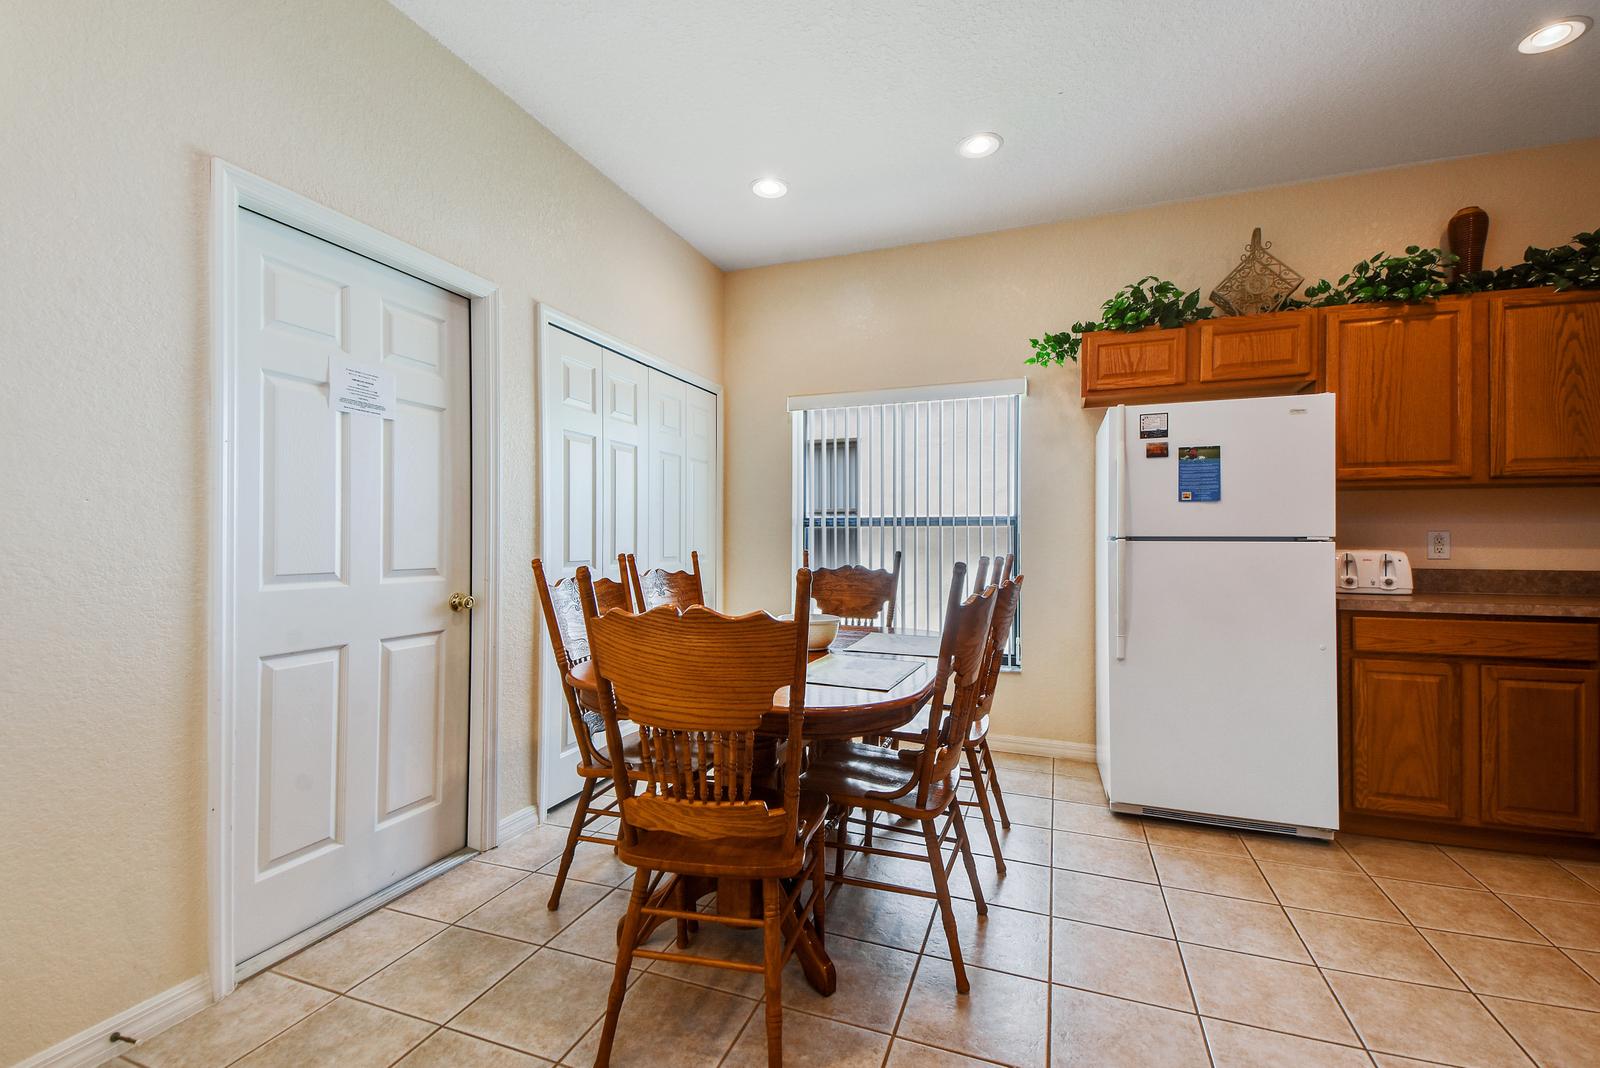 mission park vacation rentals vacation rentals united states florida clermont